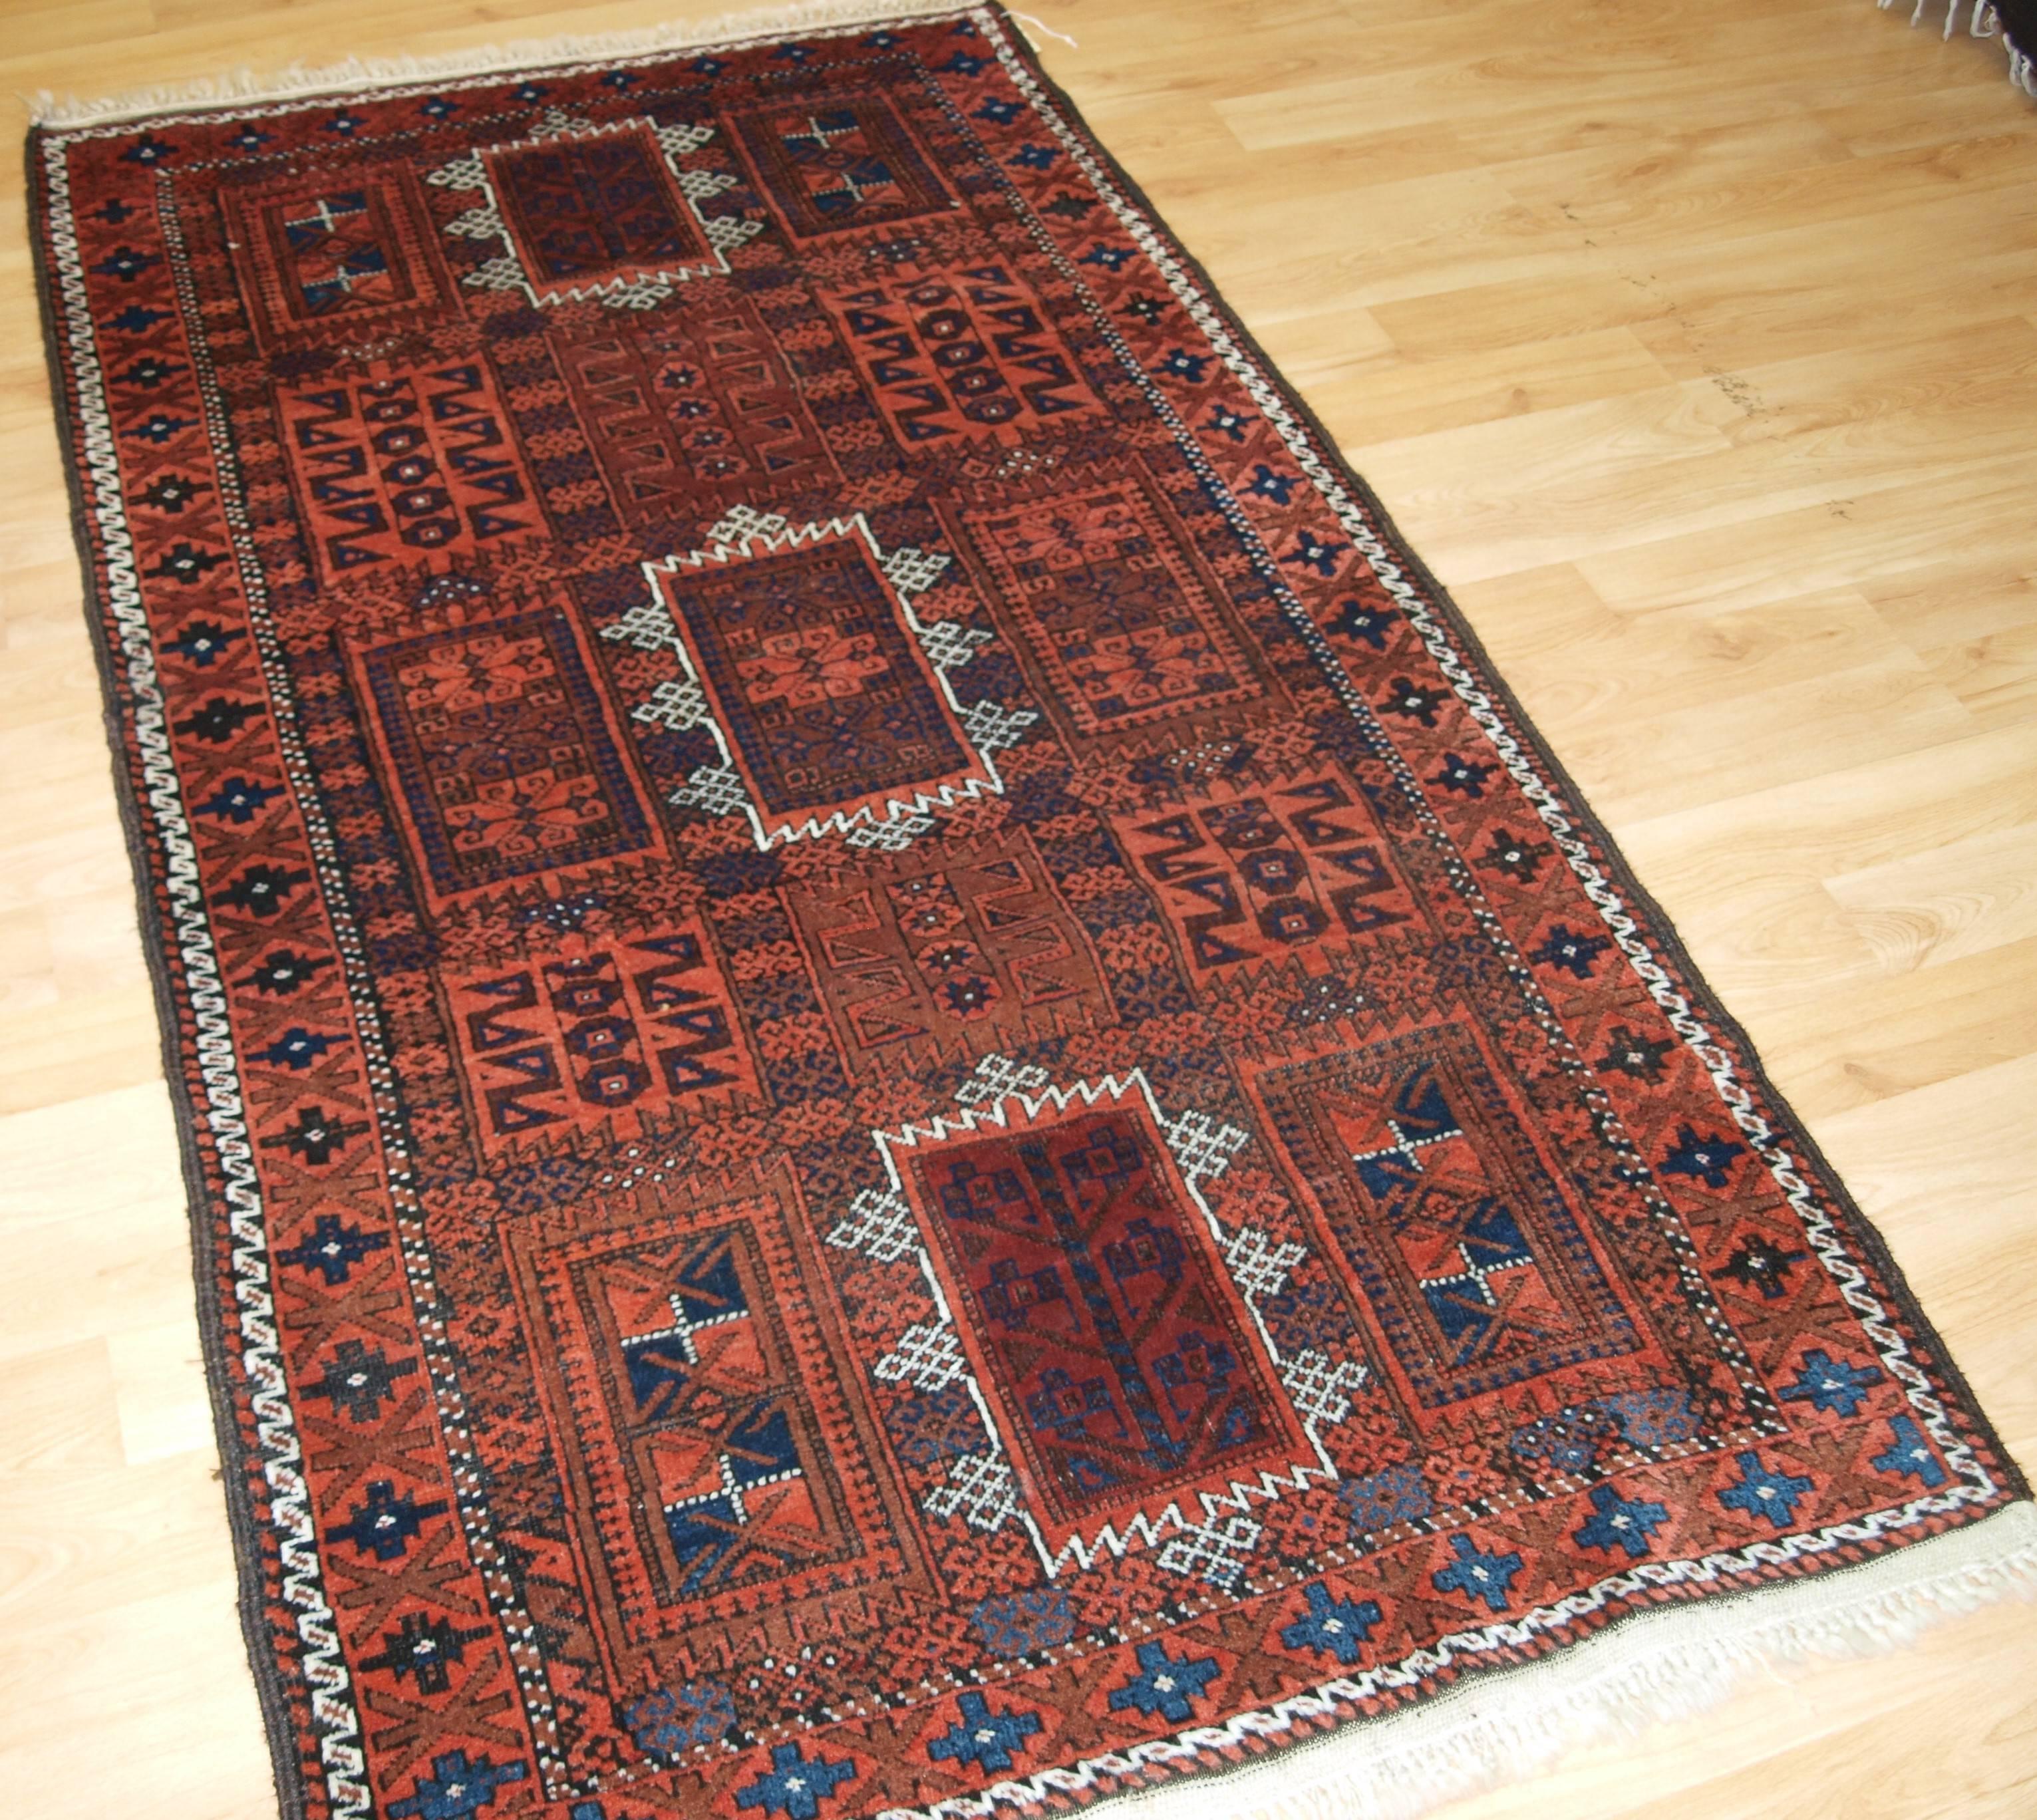 Antique Baluch rug with traditional Timuri or Yaqub Khani tribal design, circa 1900.
Size: 6ft 5in x 3ft 7in (196 x 108cm).

Antique Baluch rug, with Traditional Design often found in both Timuri and Yaqub Khani weavings,

circa 1900.

A very